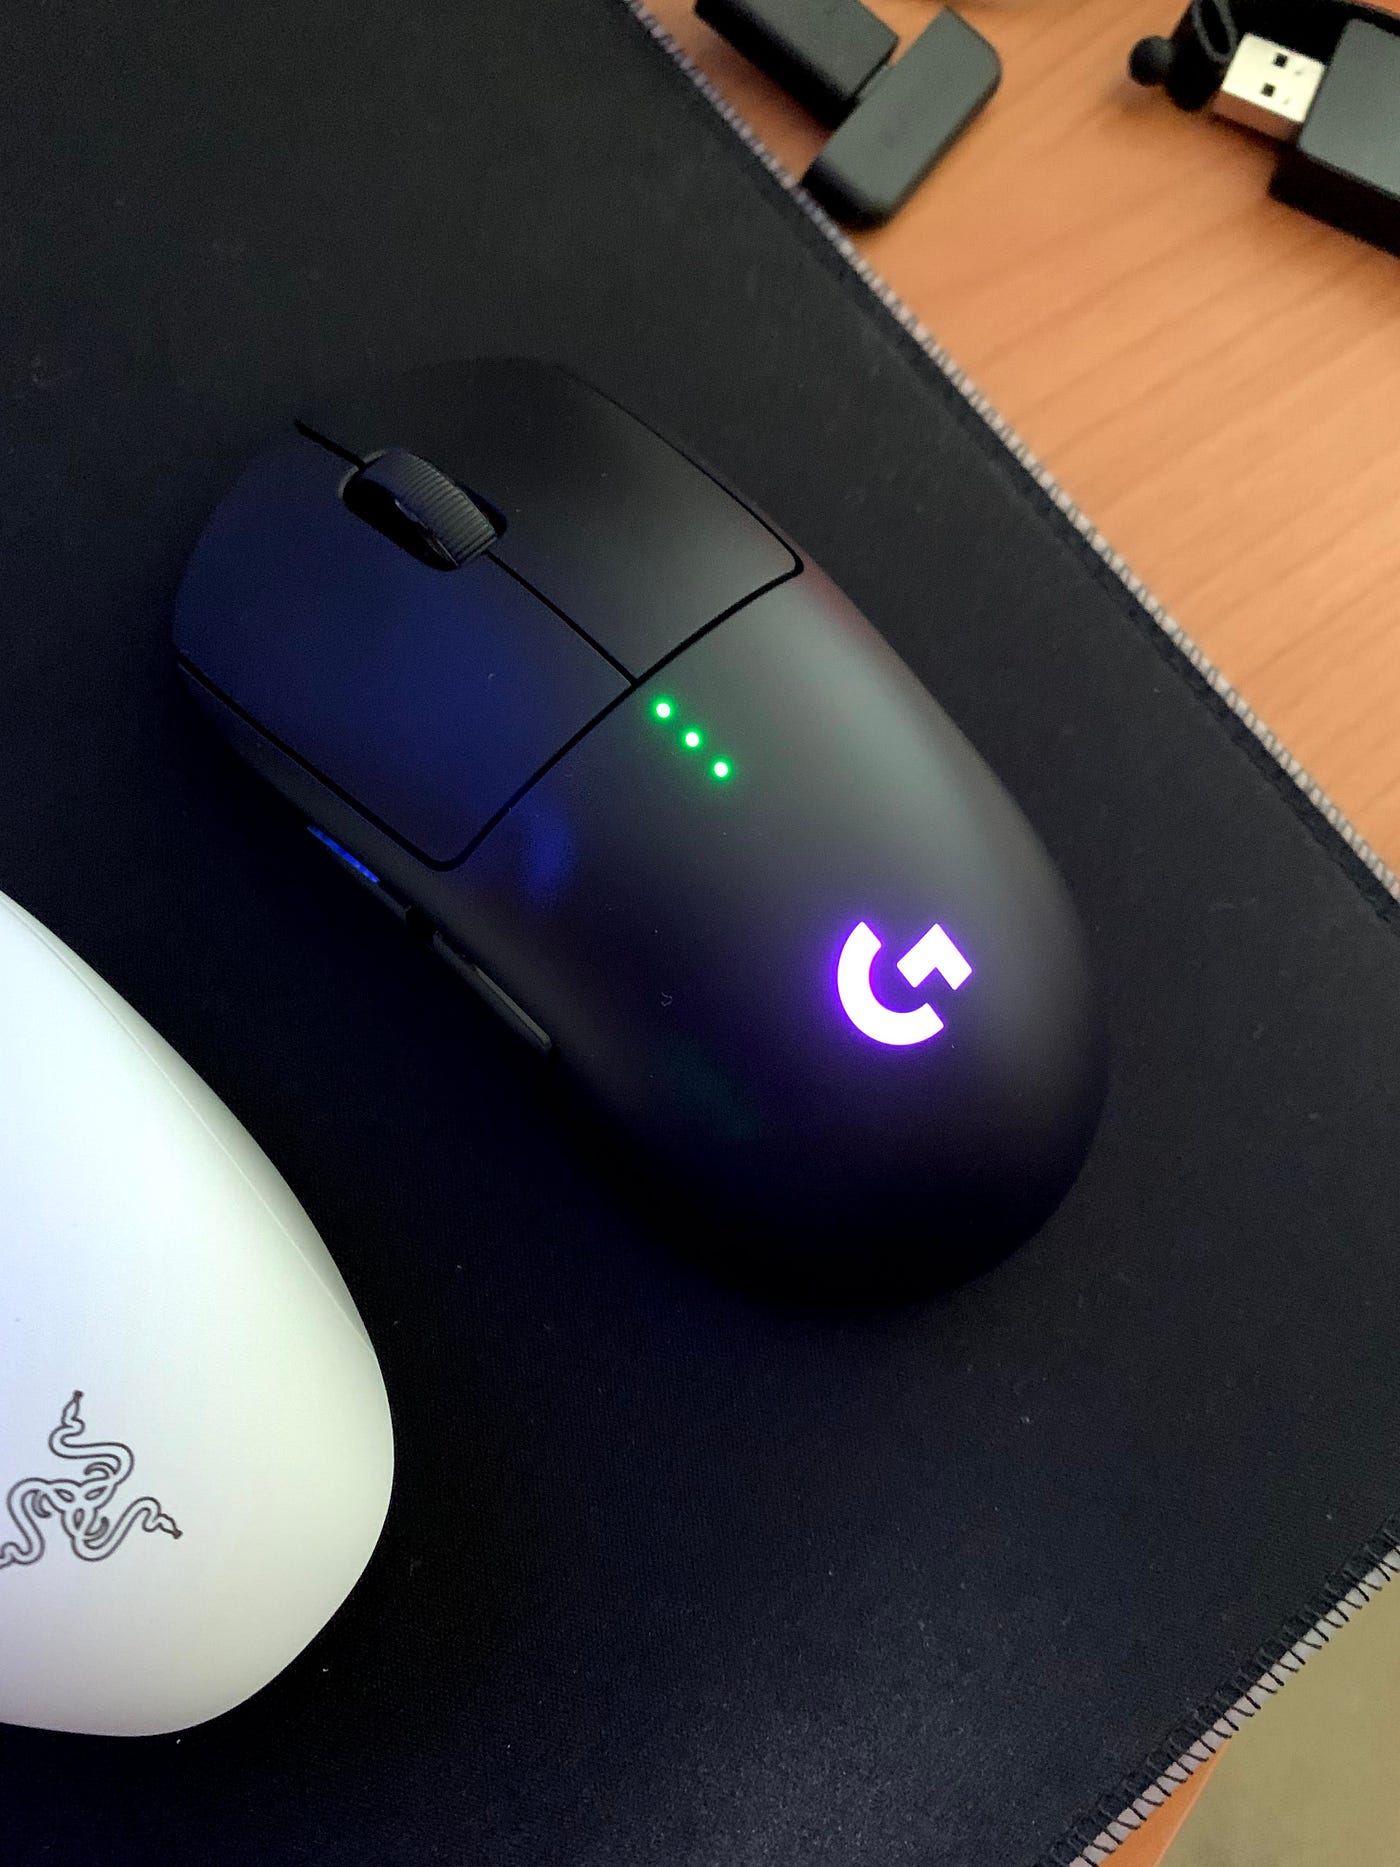 G PRO Wireless Gaming Mouse